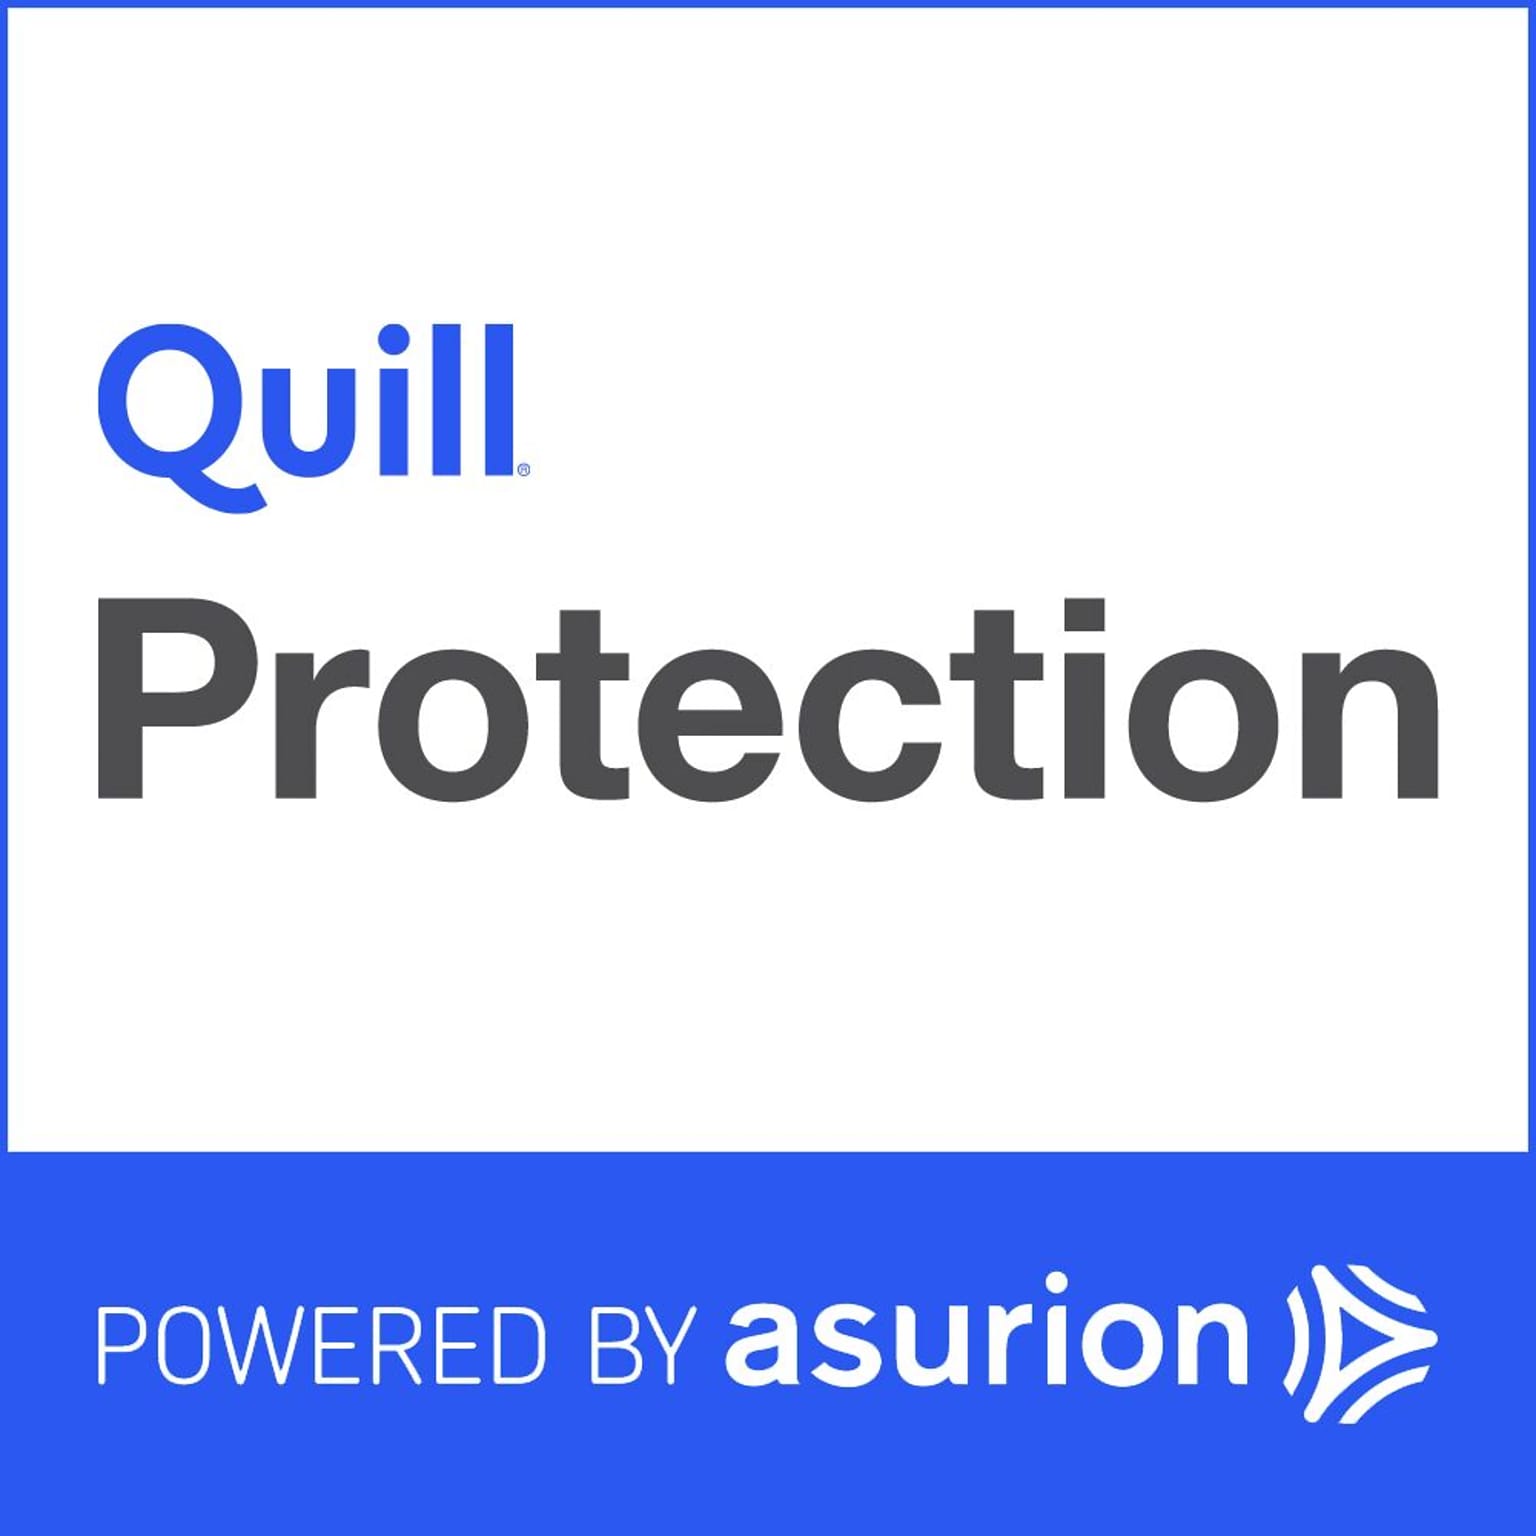 Quill.com 3 Year Protection Plan $0-$29.99